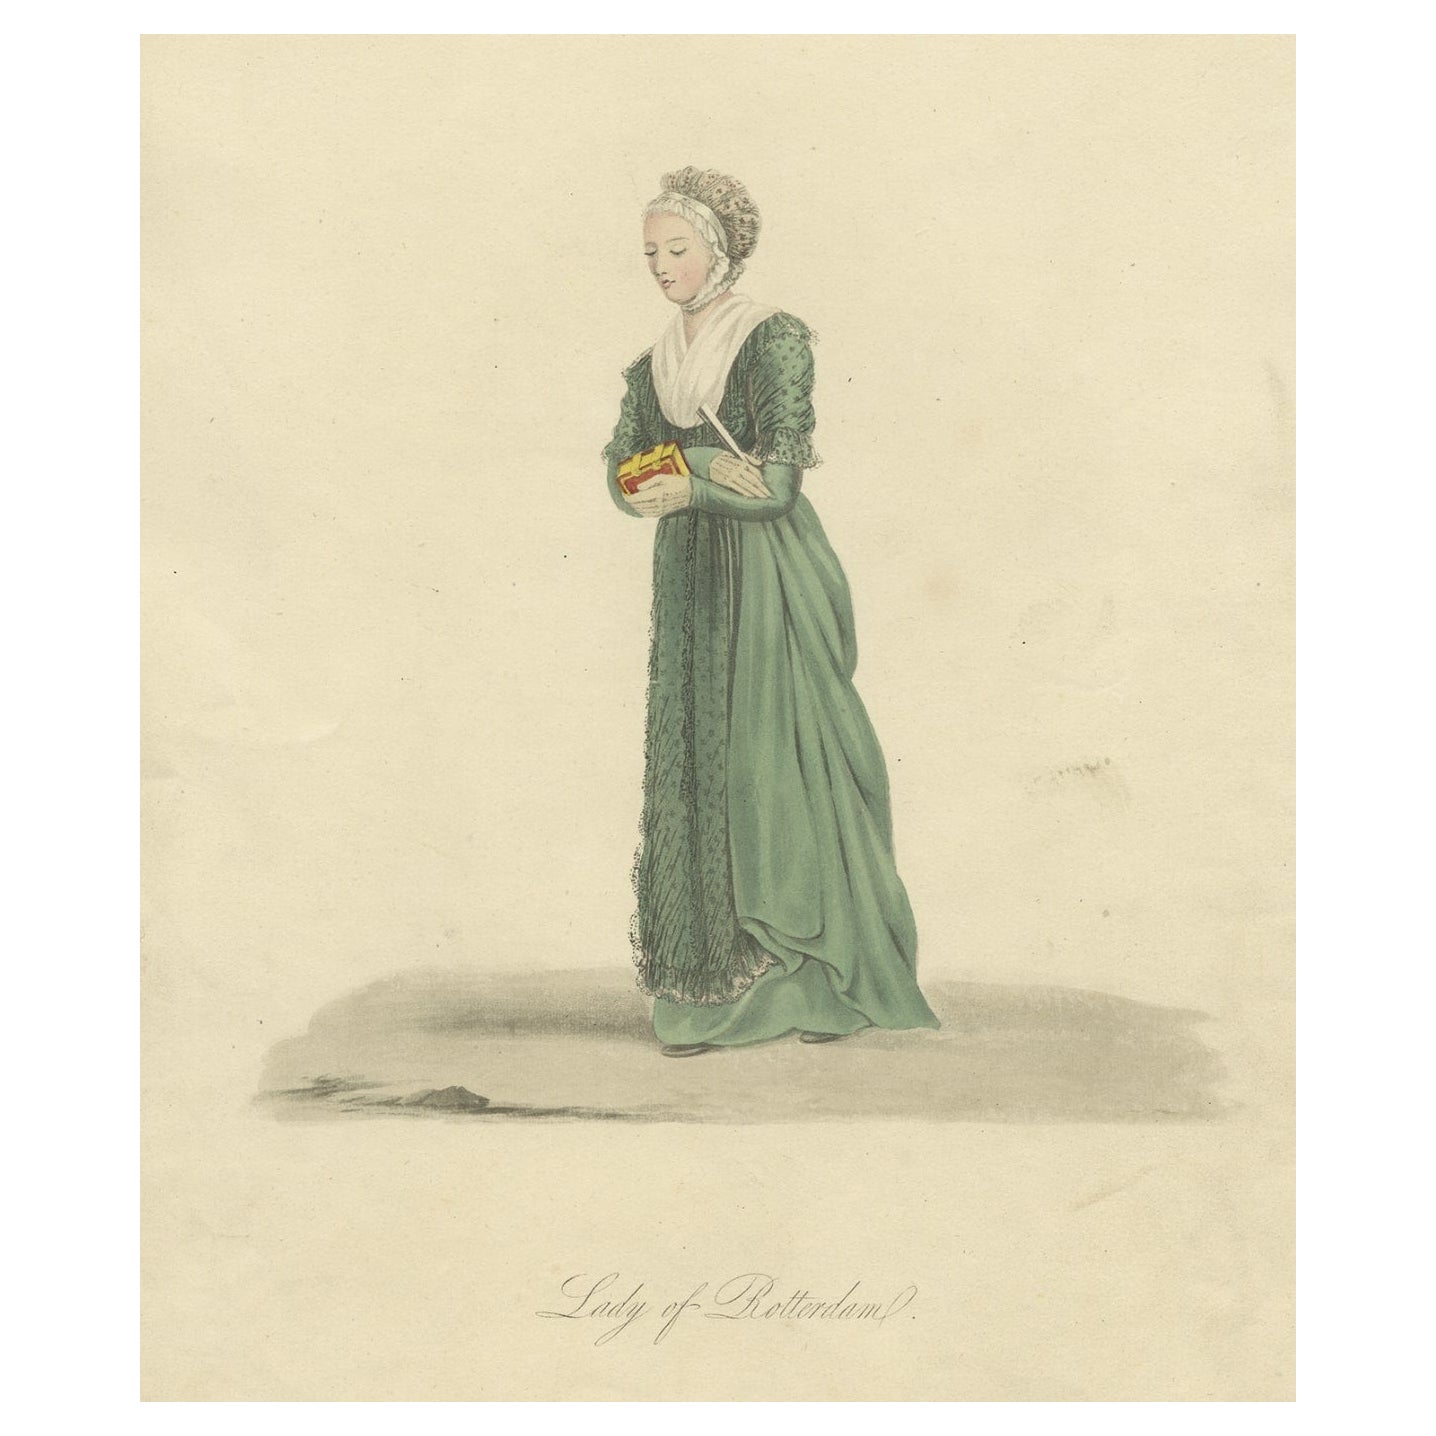 Antique Hand-Colored Engraving of a Lady of Rotterdam in The Netherlands, 1817 For Sale